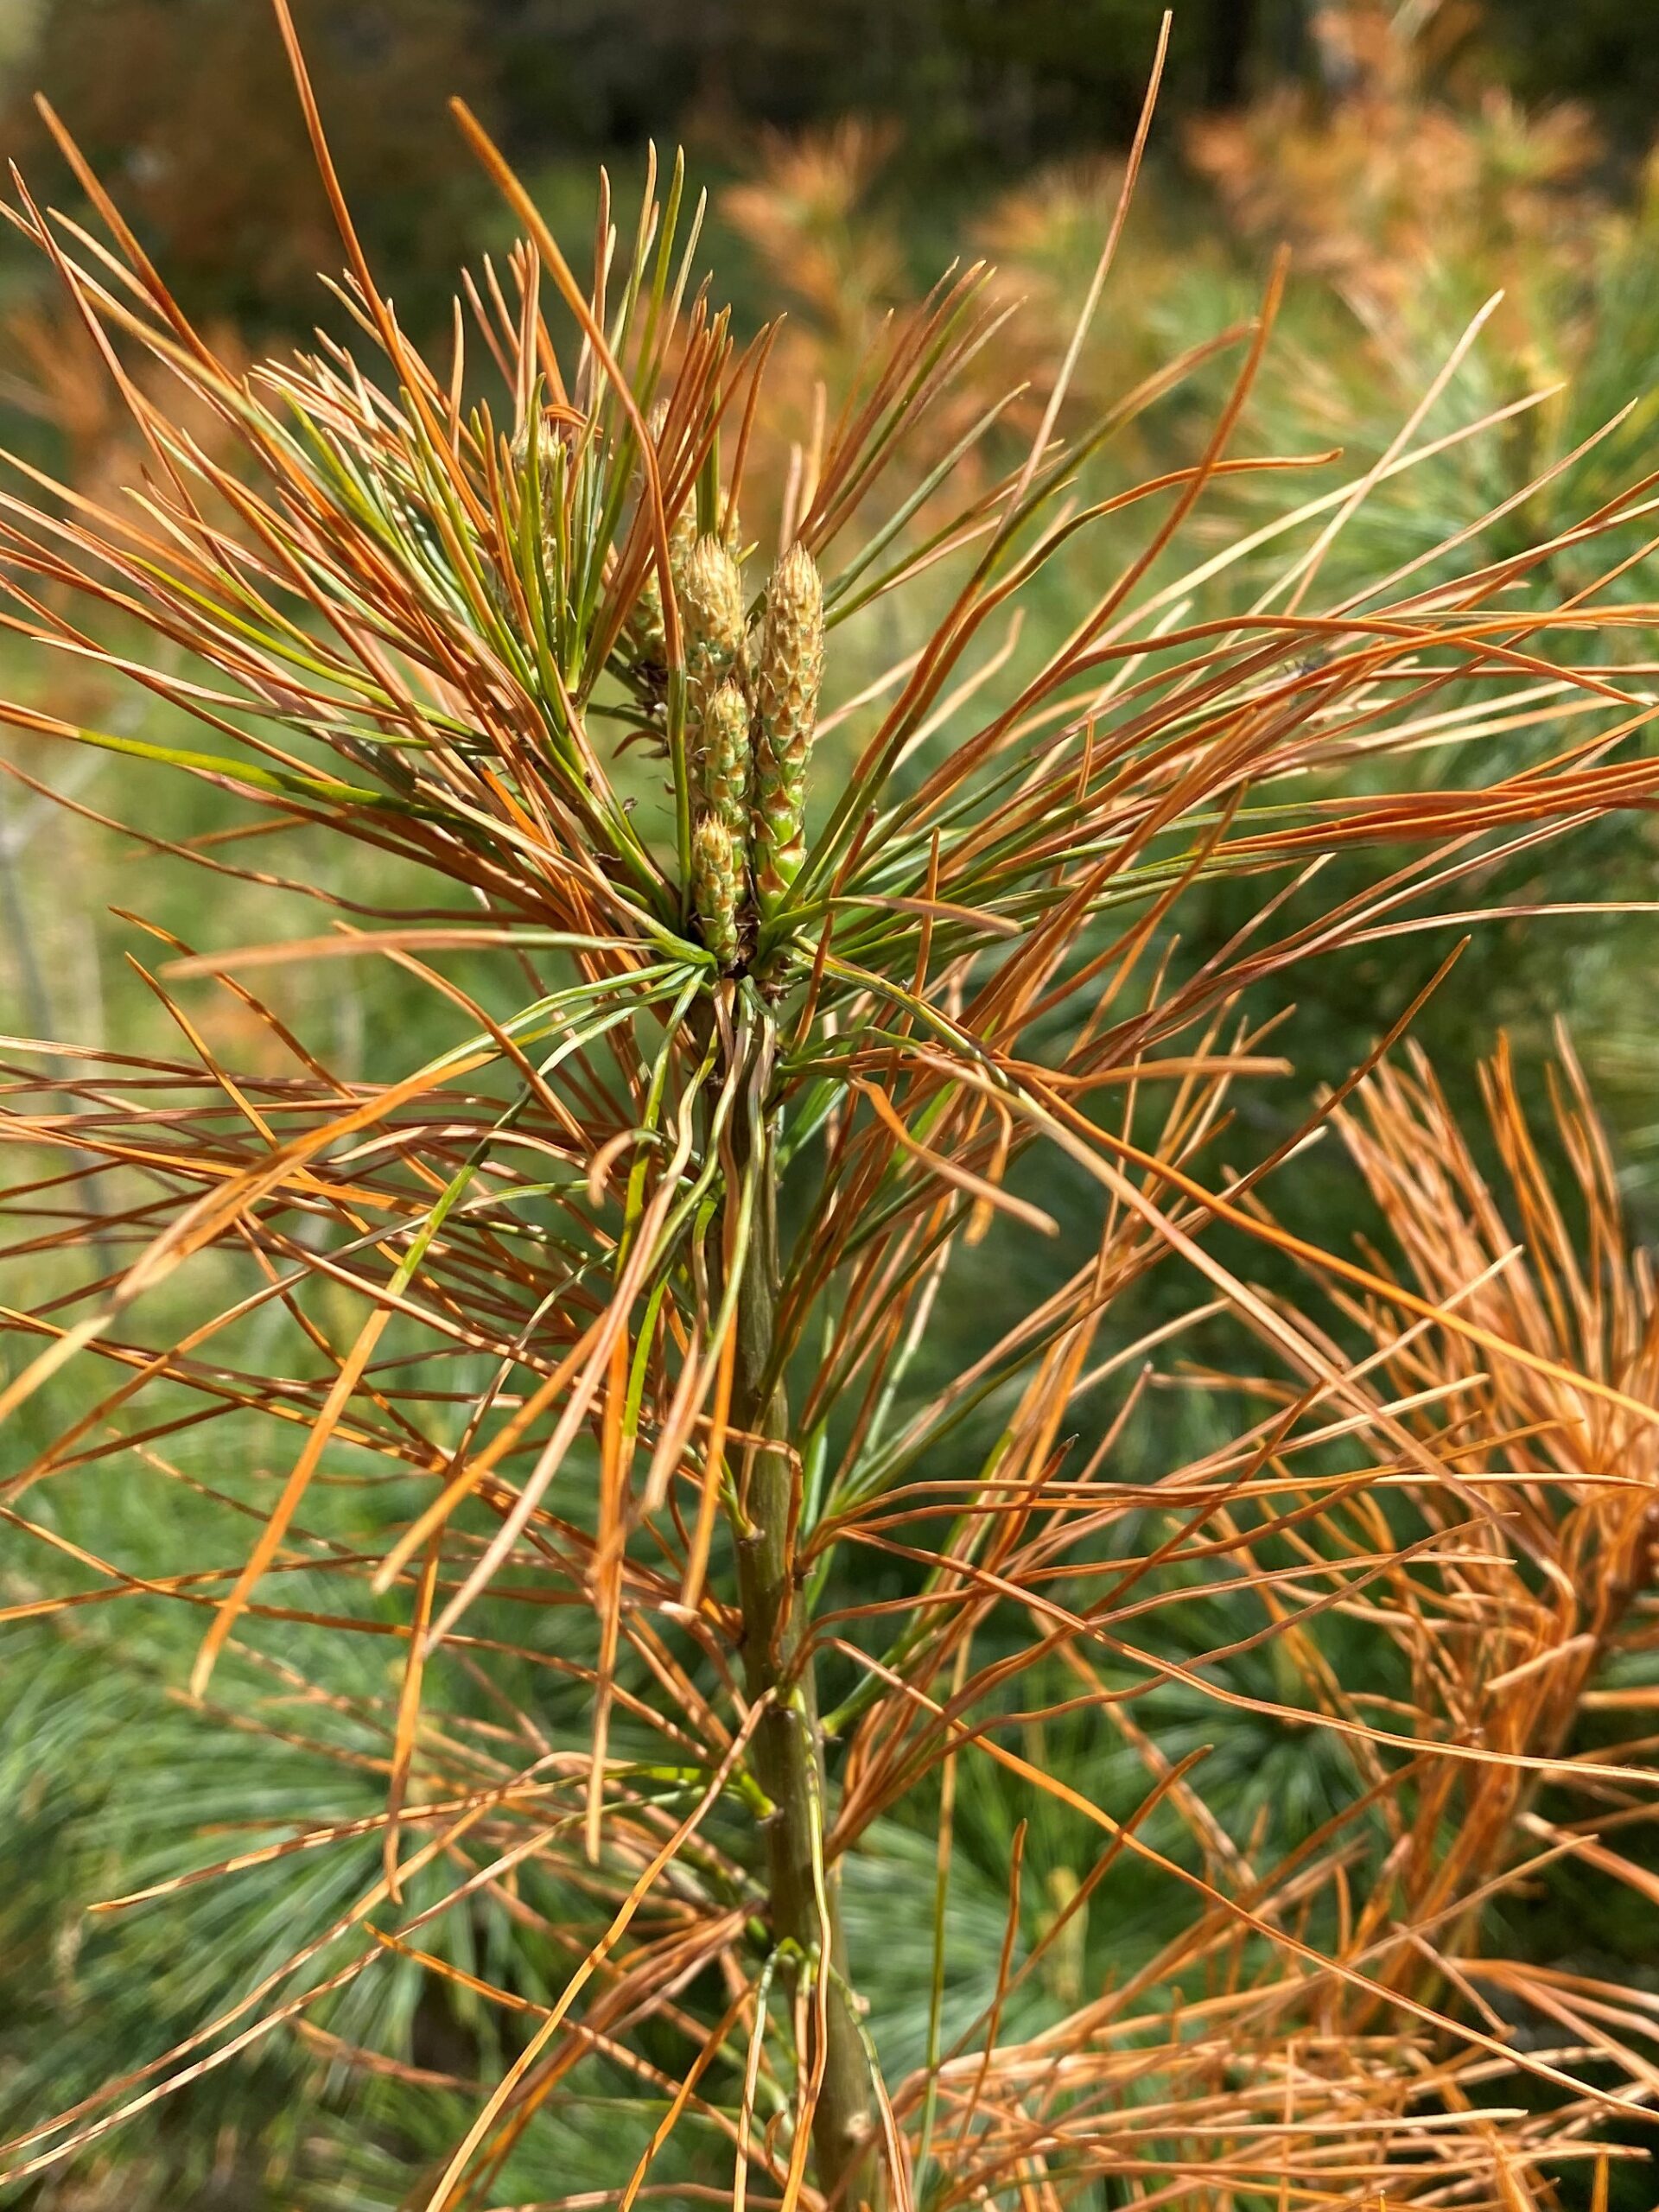 A young white pine tree with brown needles has buds growing like normal.